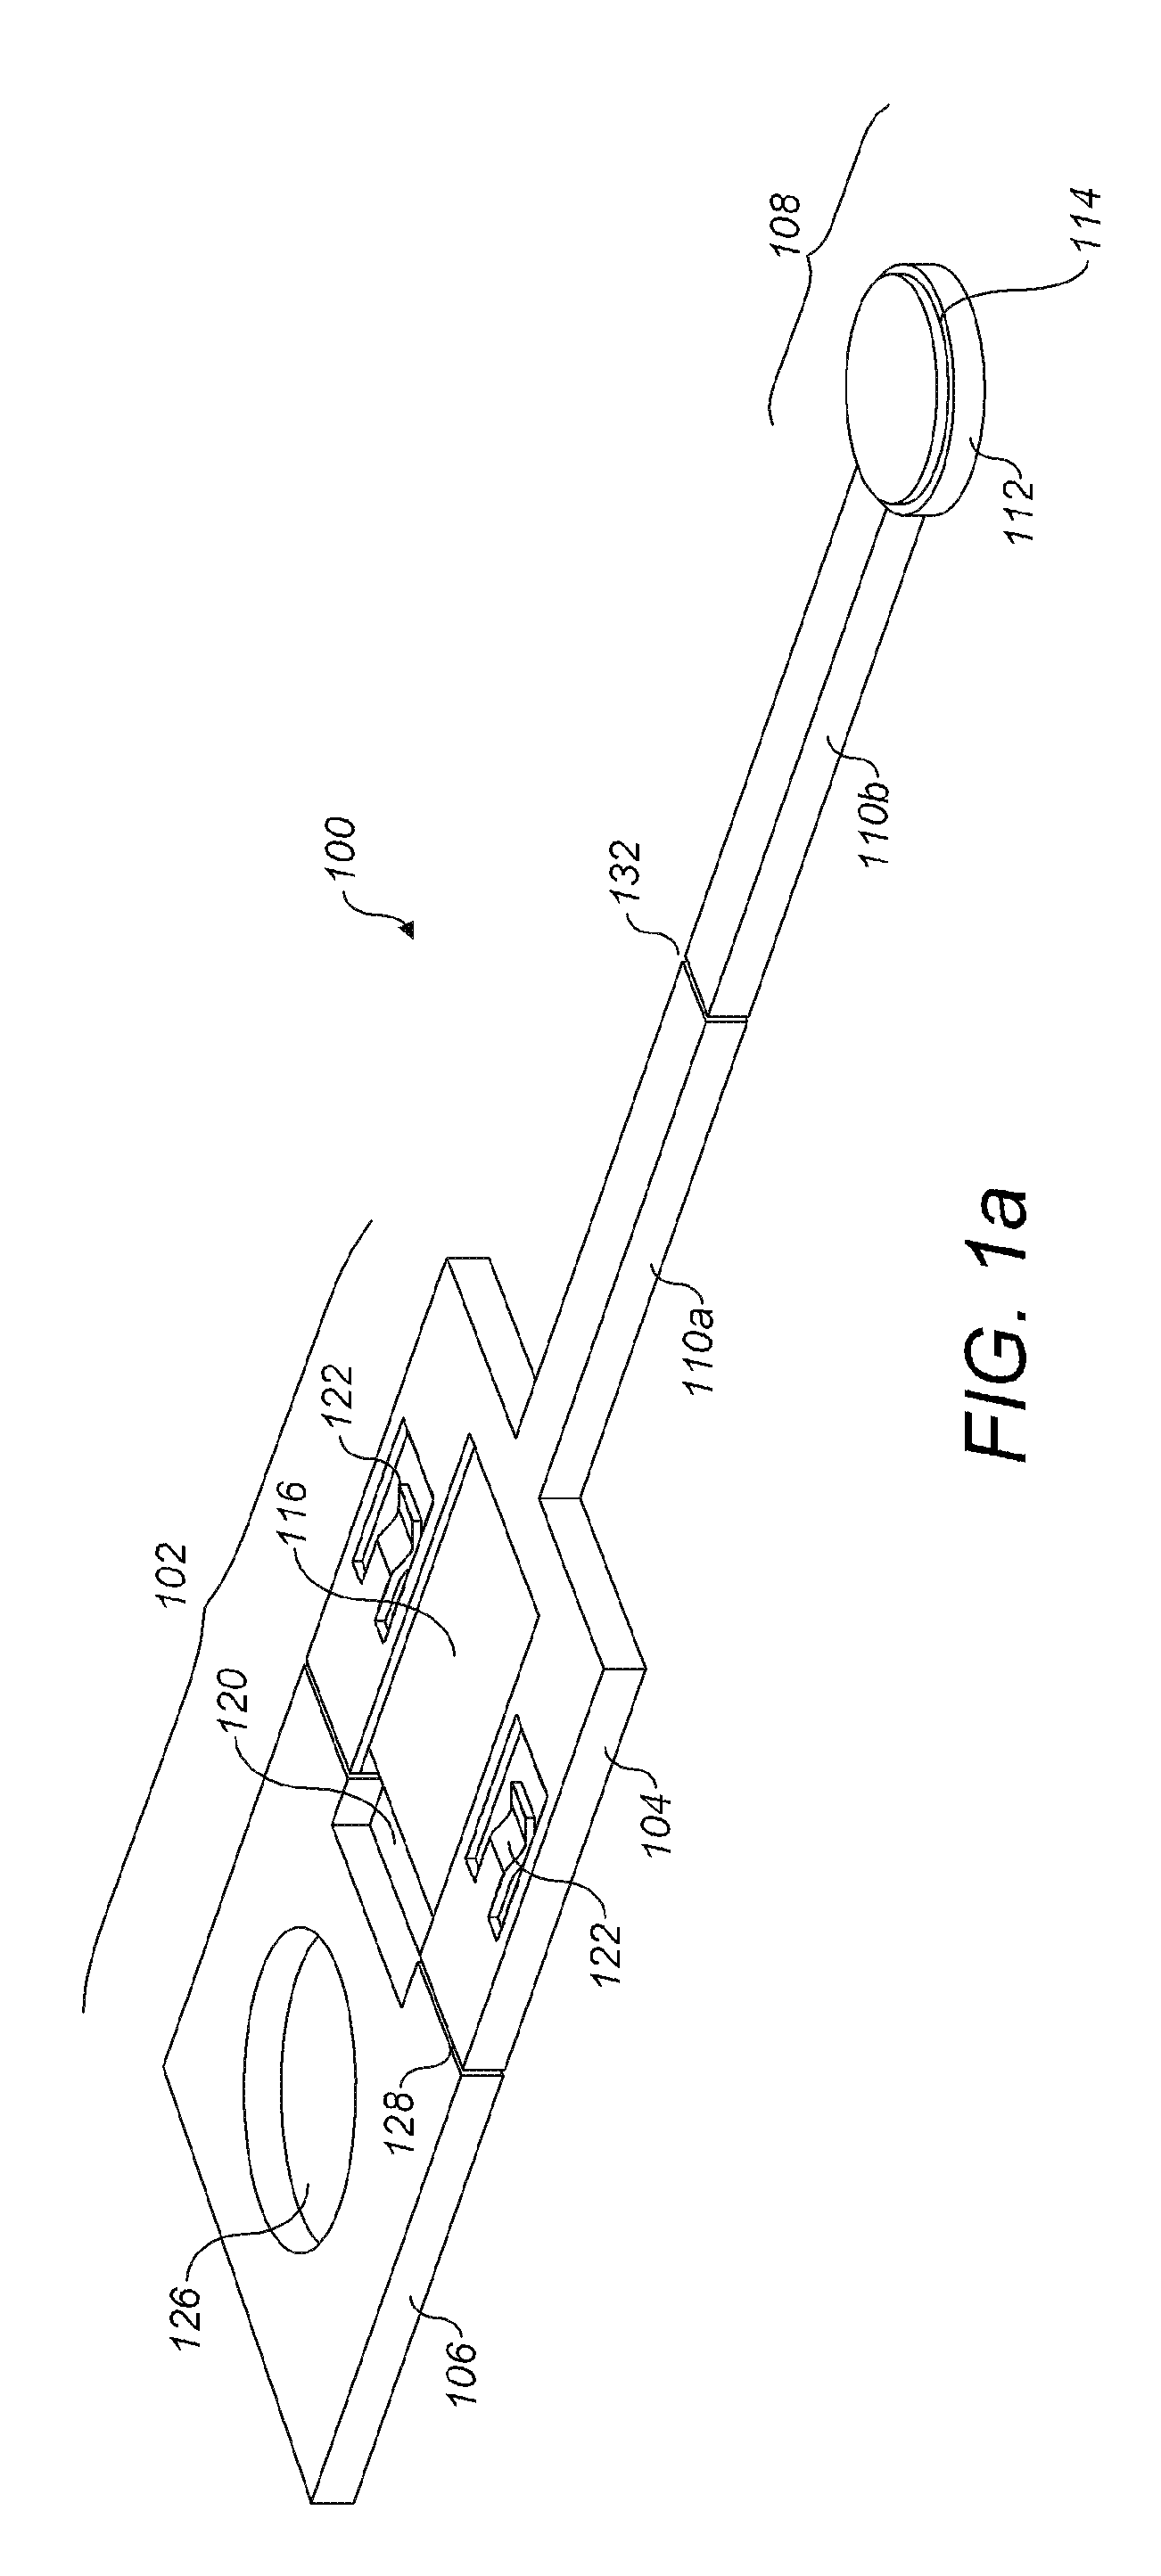 Biological sample collection device